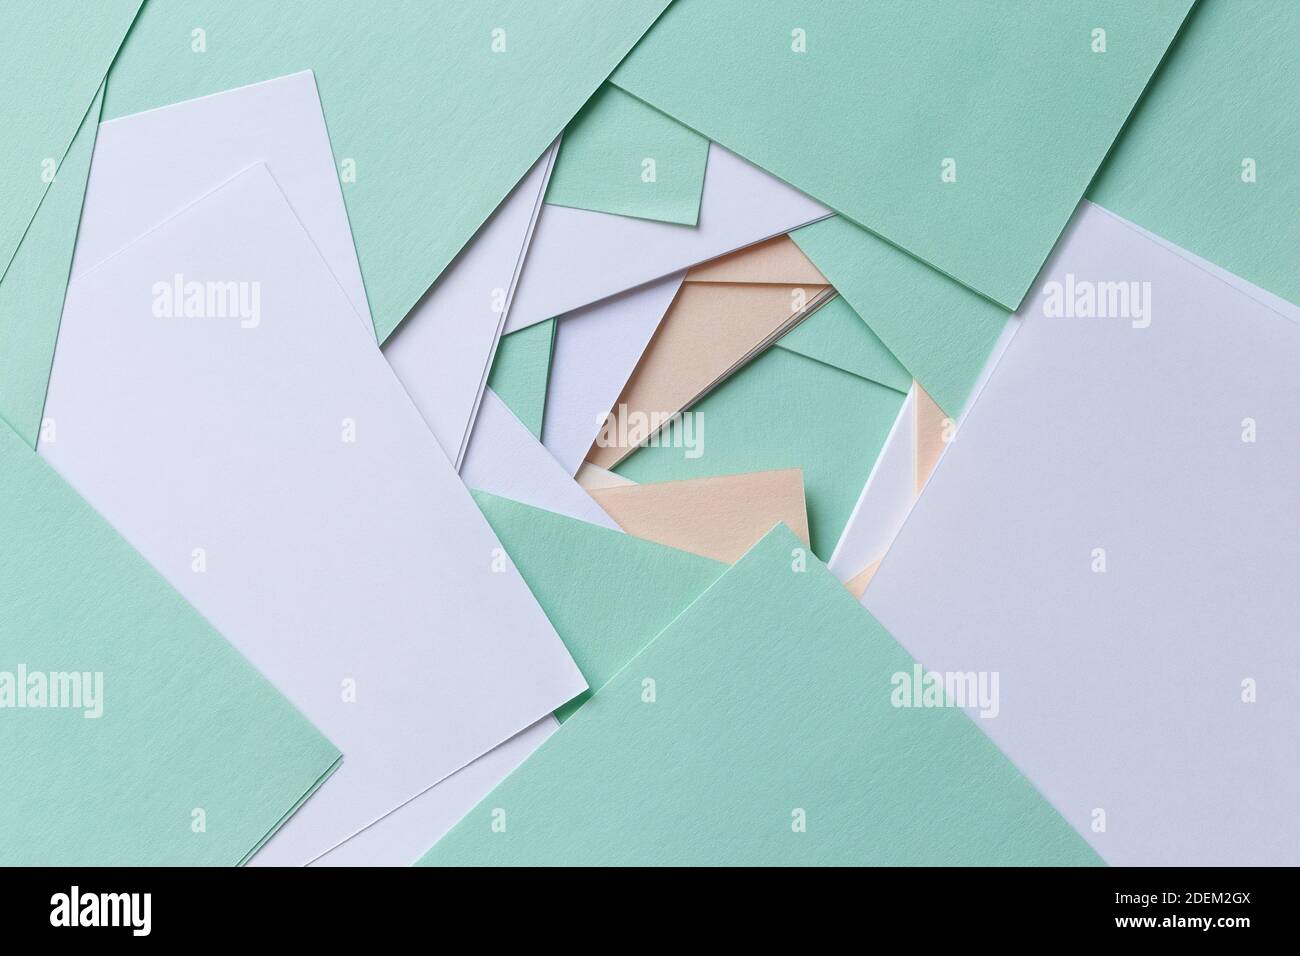 Abstract background made of pieces of paper for notes in the form of a swirling well. Stock Photo